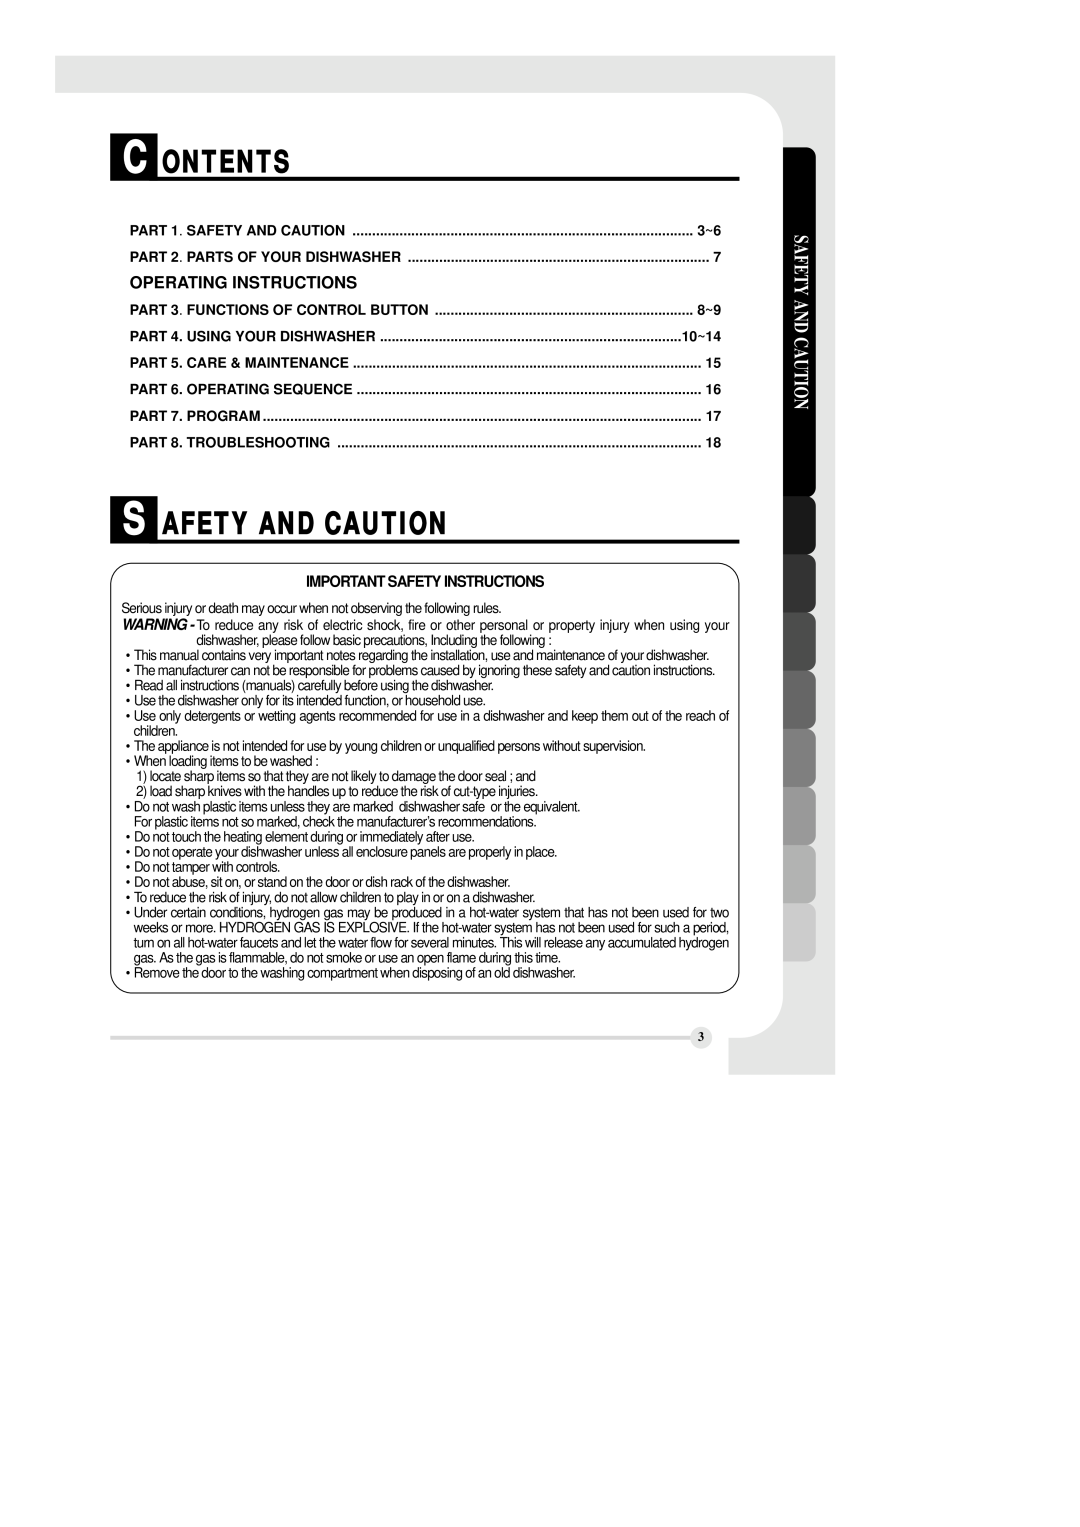 LG Electronics LDS 5811ST manual C Ontents, S Afety And Caution, Operating Instructions, Important Safety Instructions 